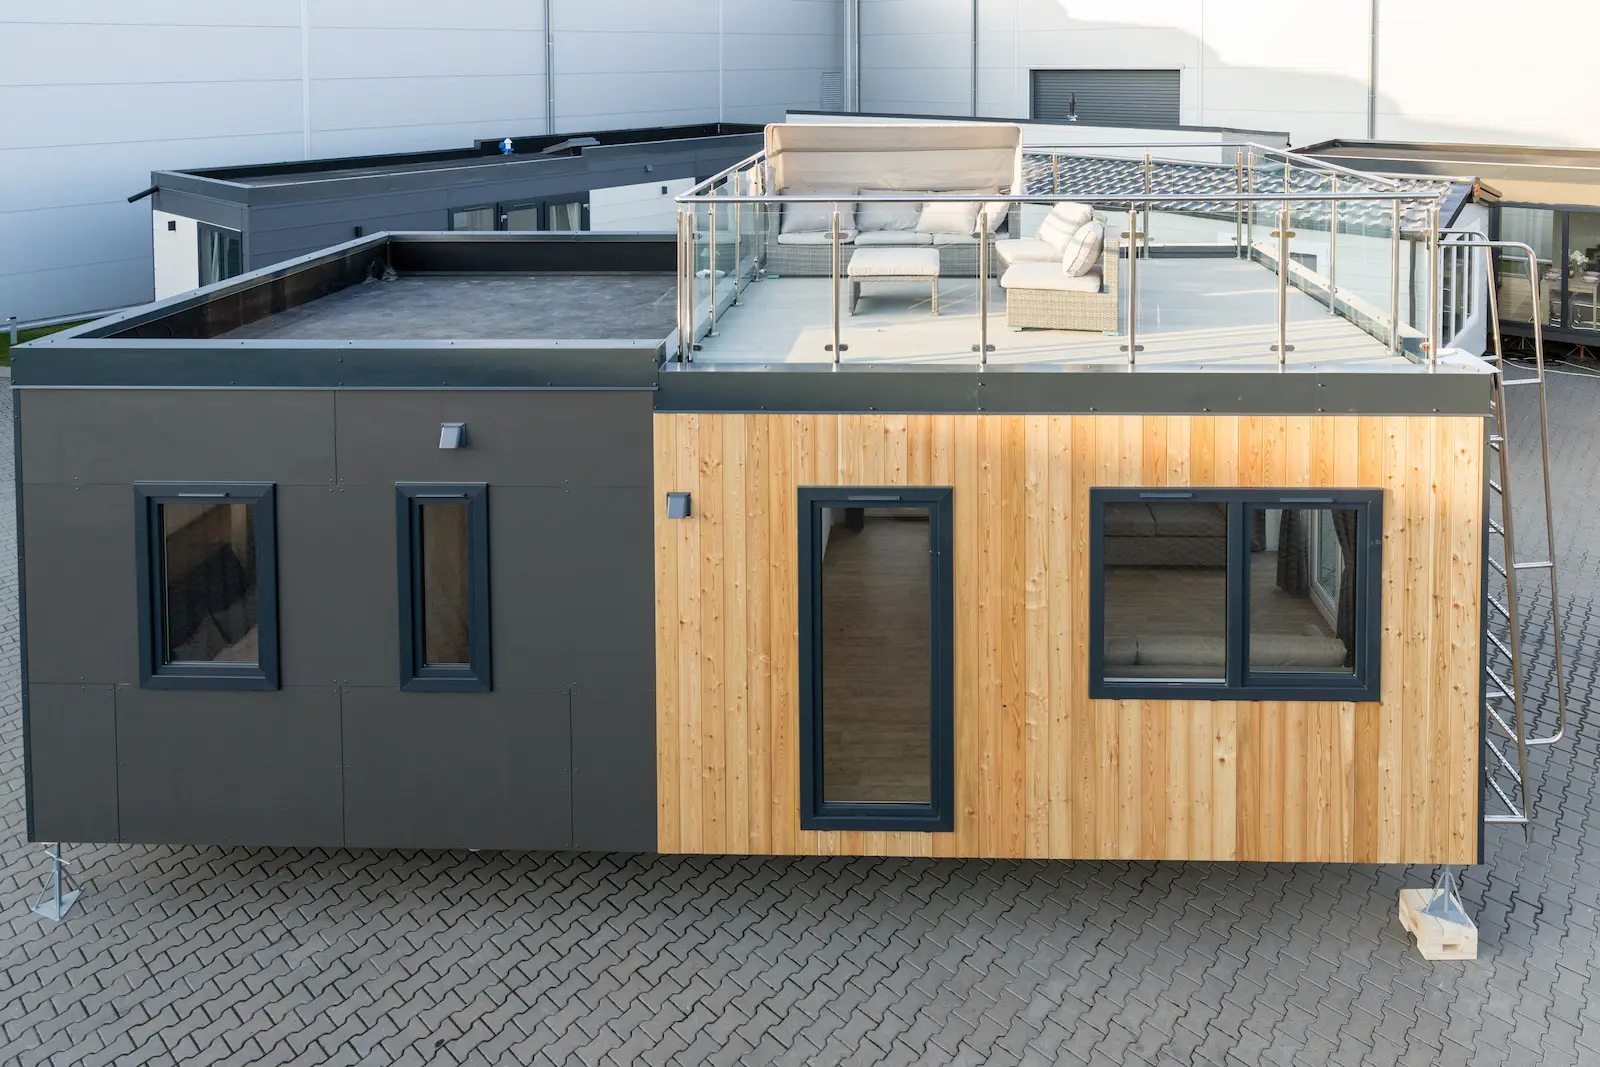 Mobile house with roof terrace, on the terrace there is a place for resting.